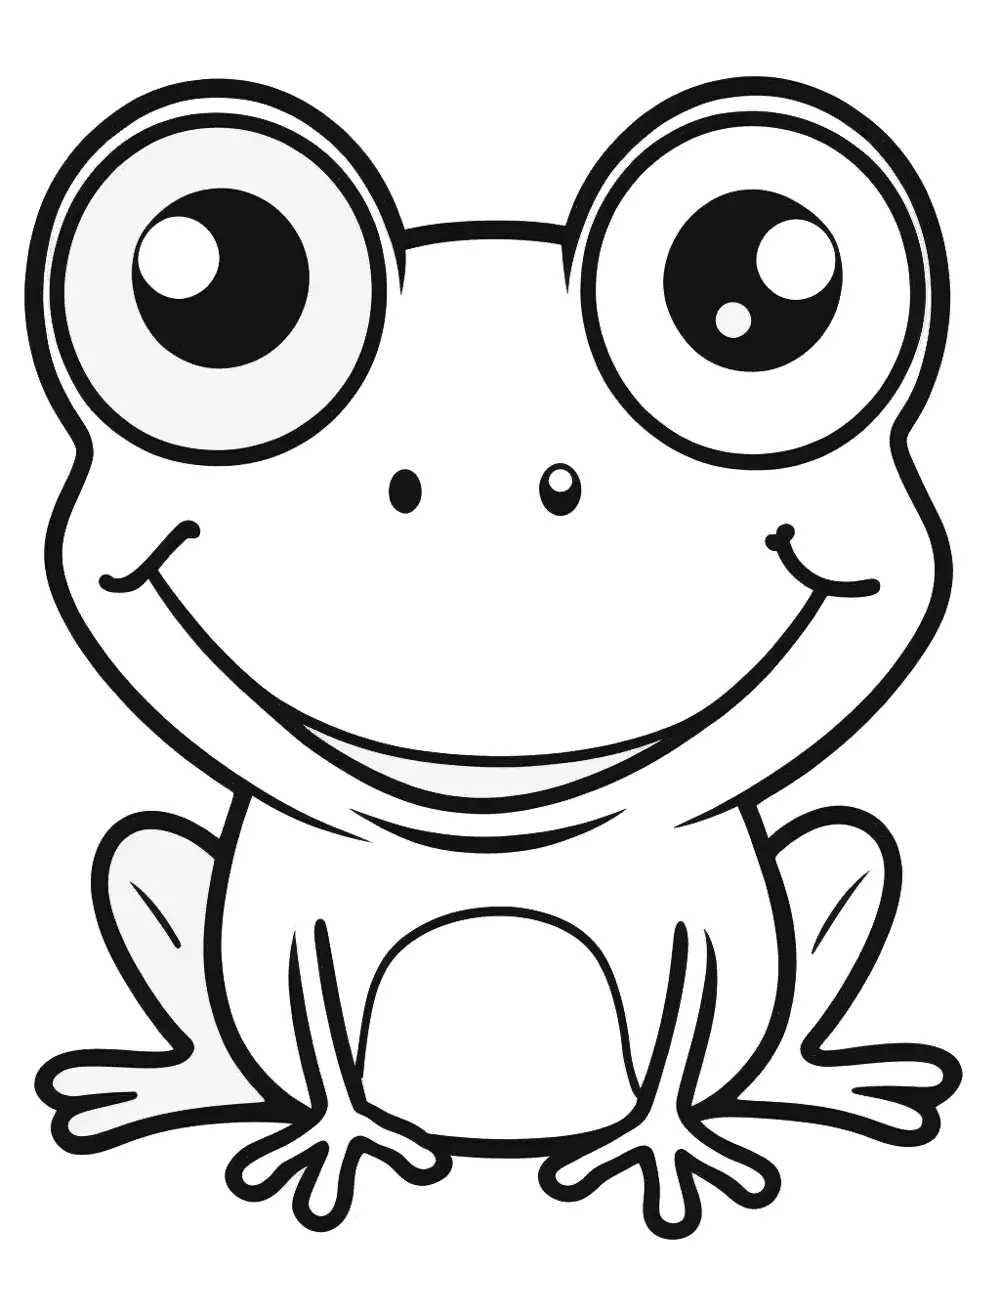 Cute Cartoon Frog Coloring Page - A cartoon-style frog with a big smile and big eyes